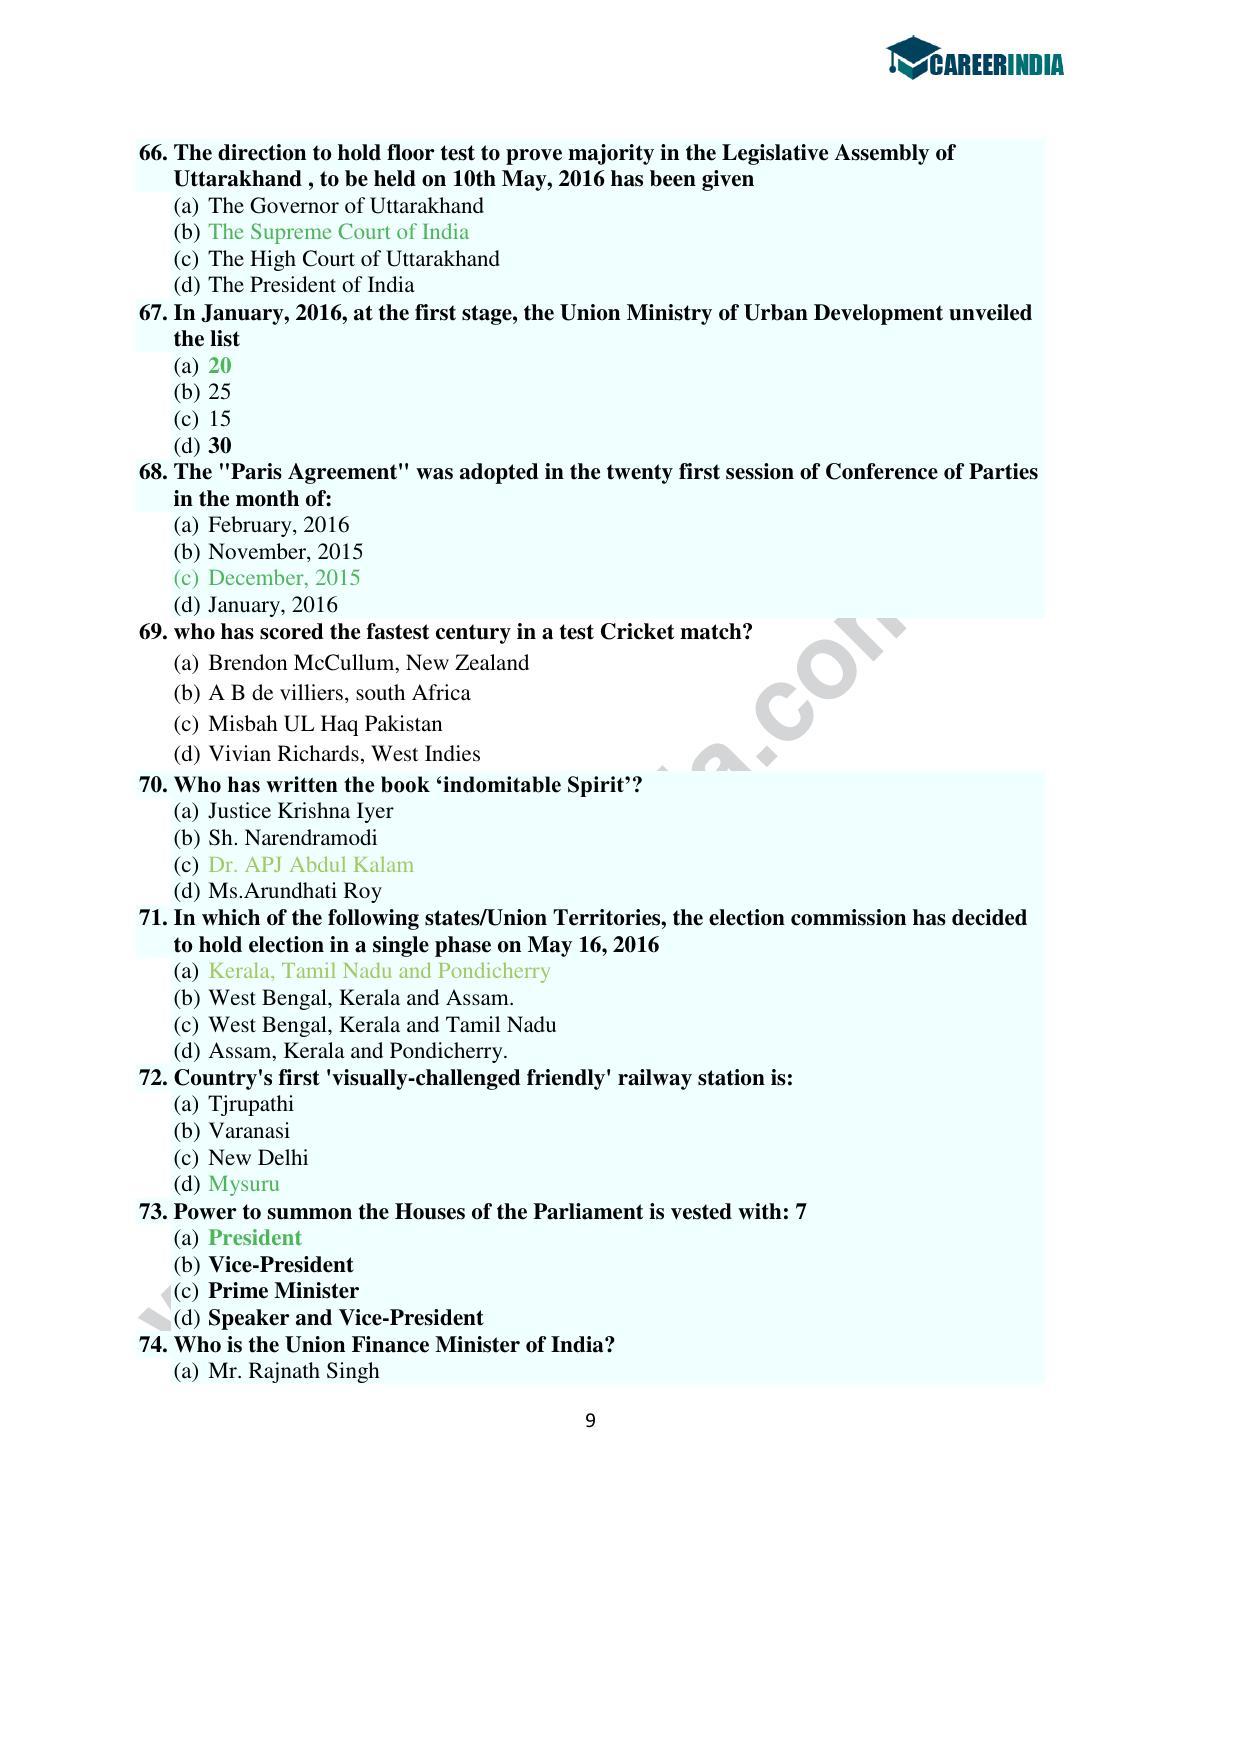 CLAT 2016 UG Question Paper with Answer Key - Page 9